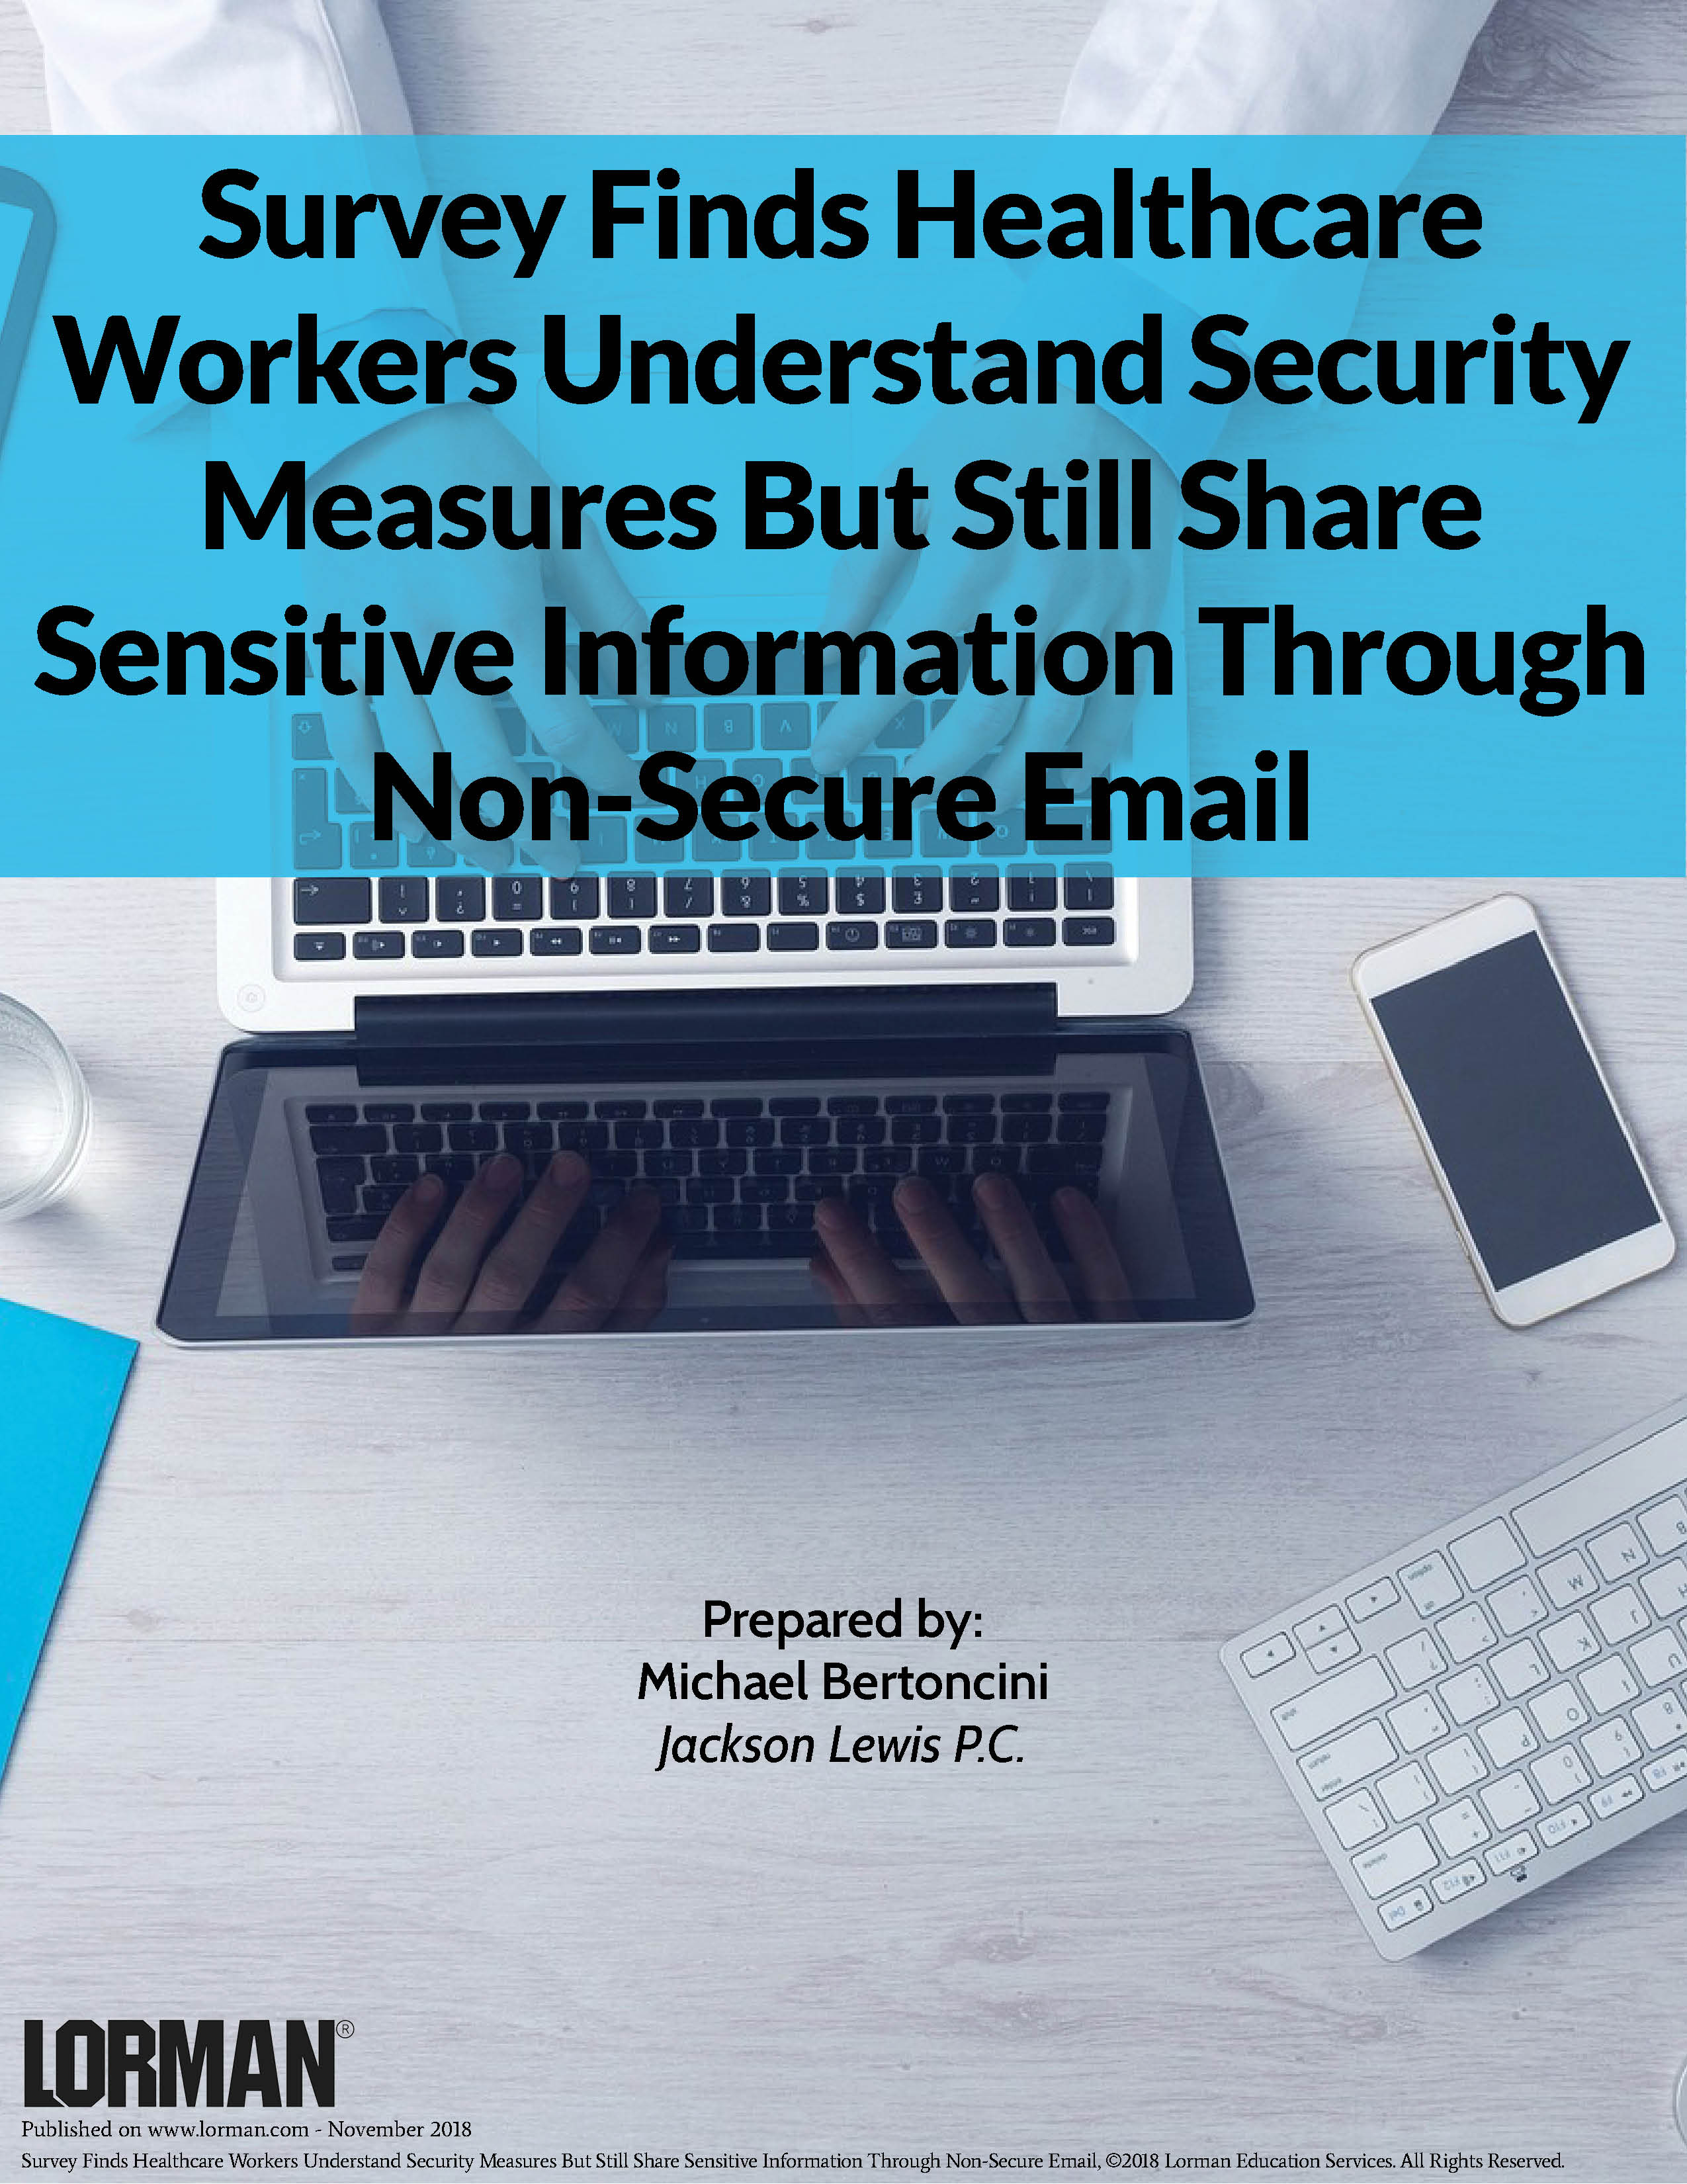 Survey Finds Healthcare Workers Understand Security Measures But Still Share Sensitive Information